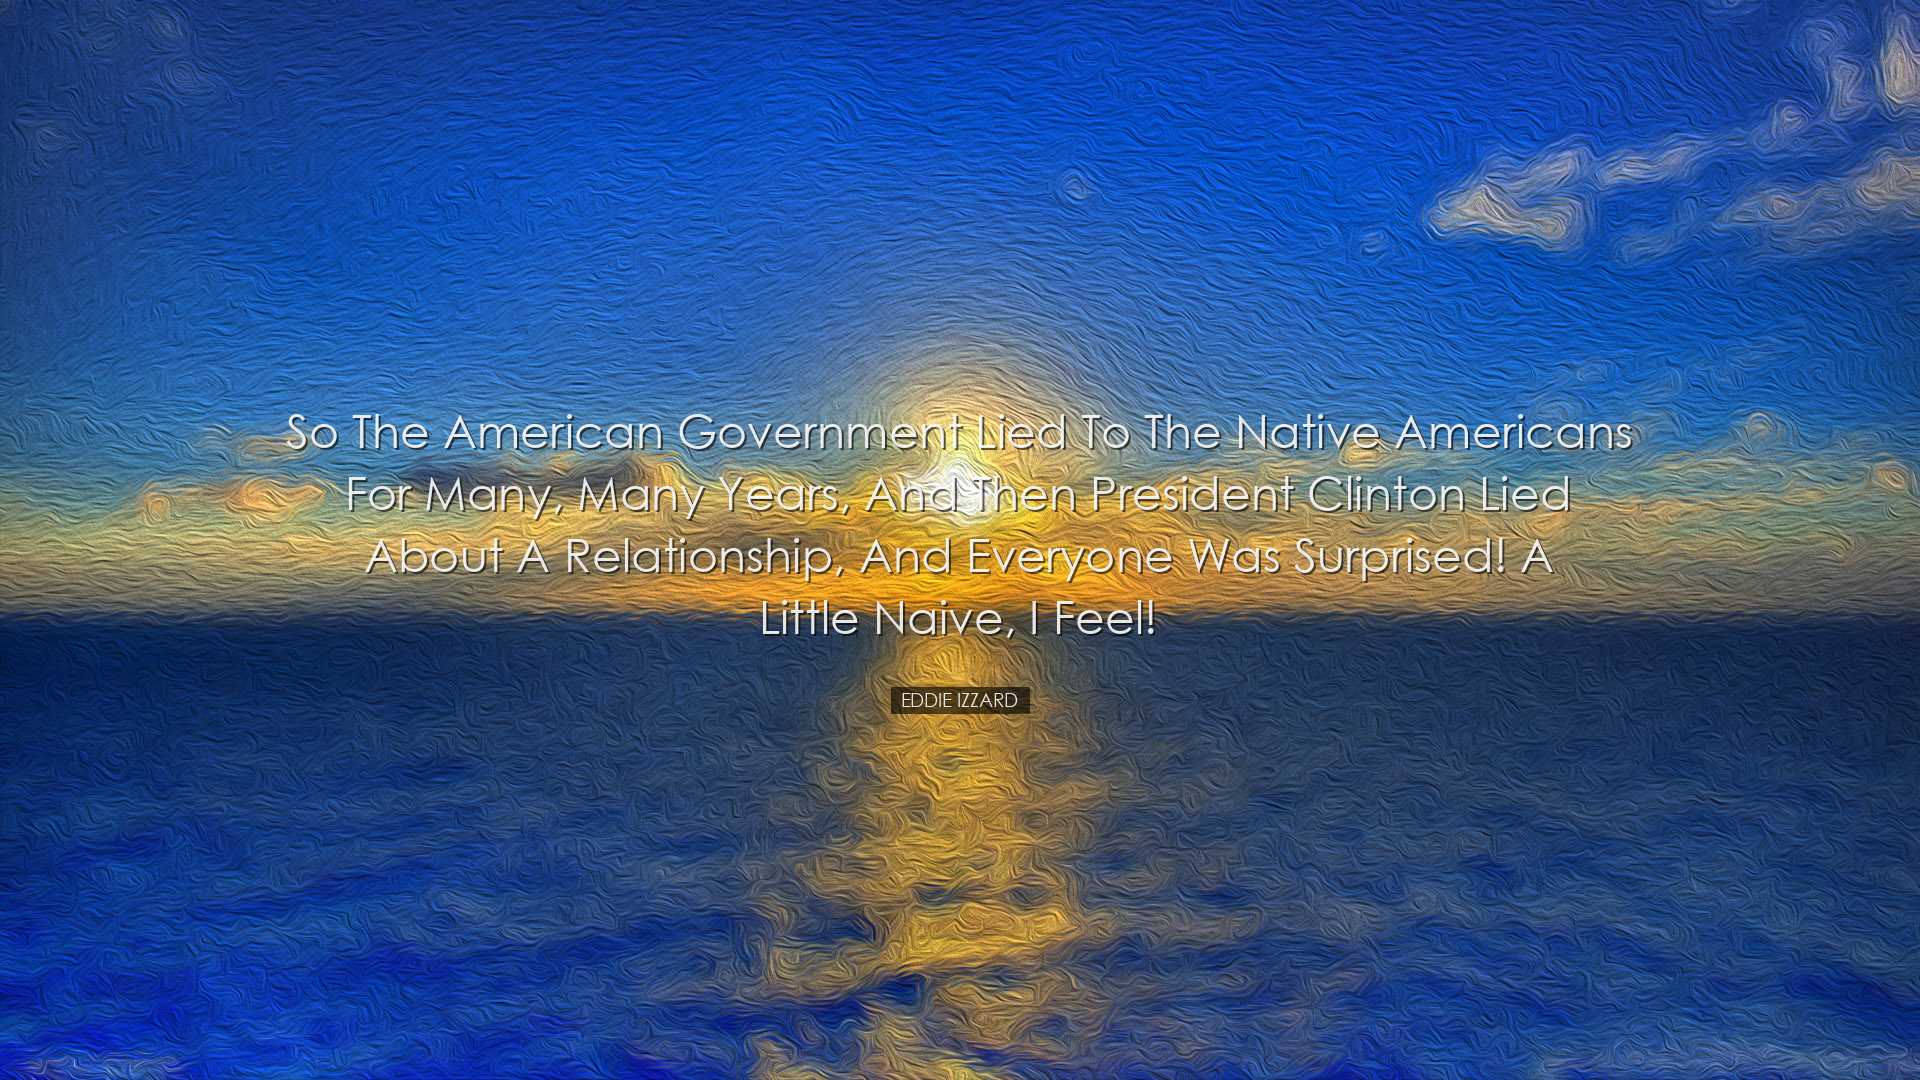 So the American government lied to the Native Americans for many,